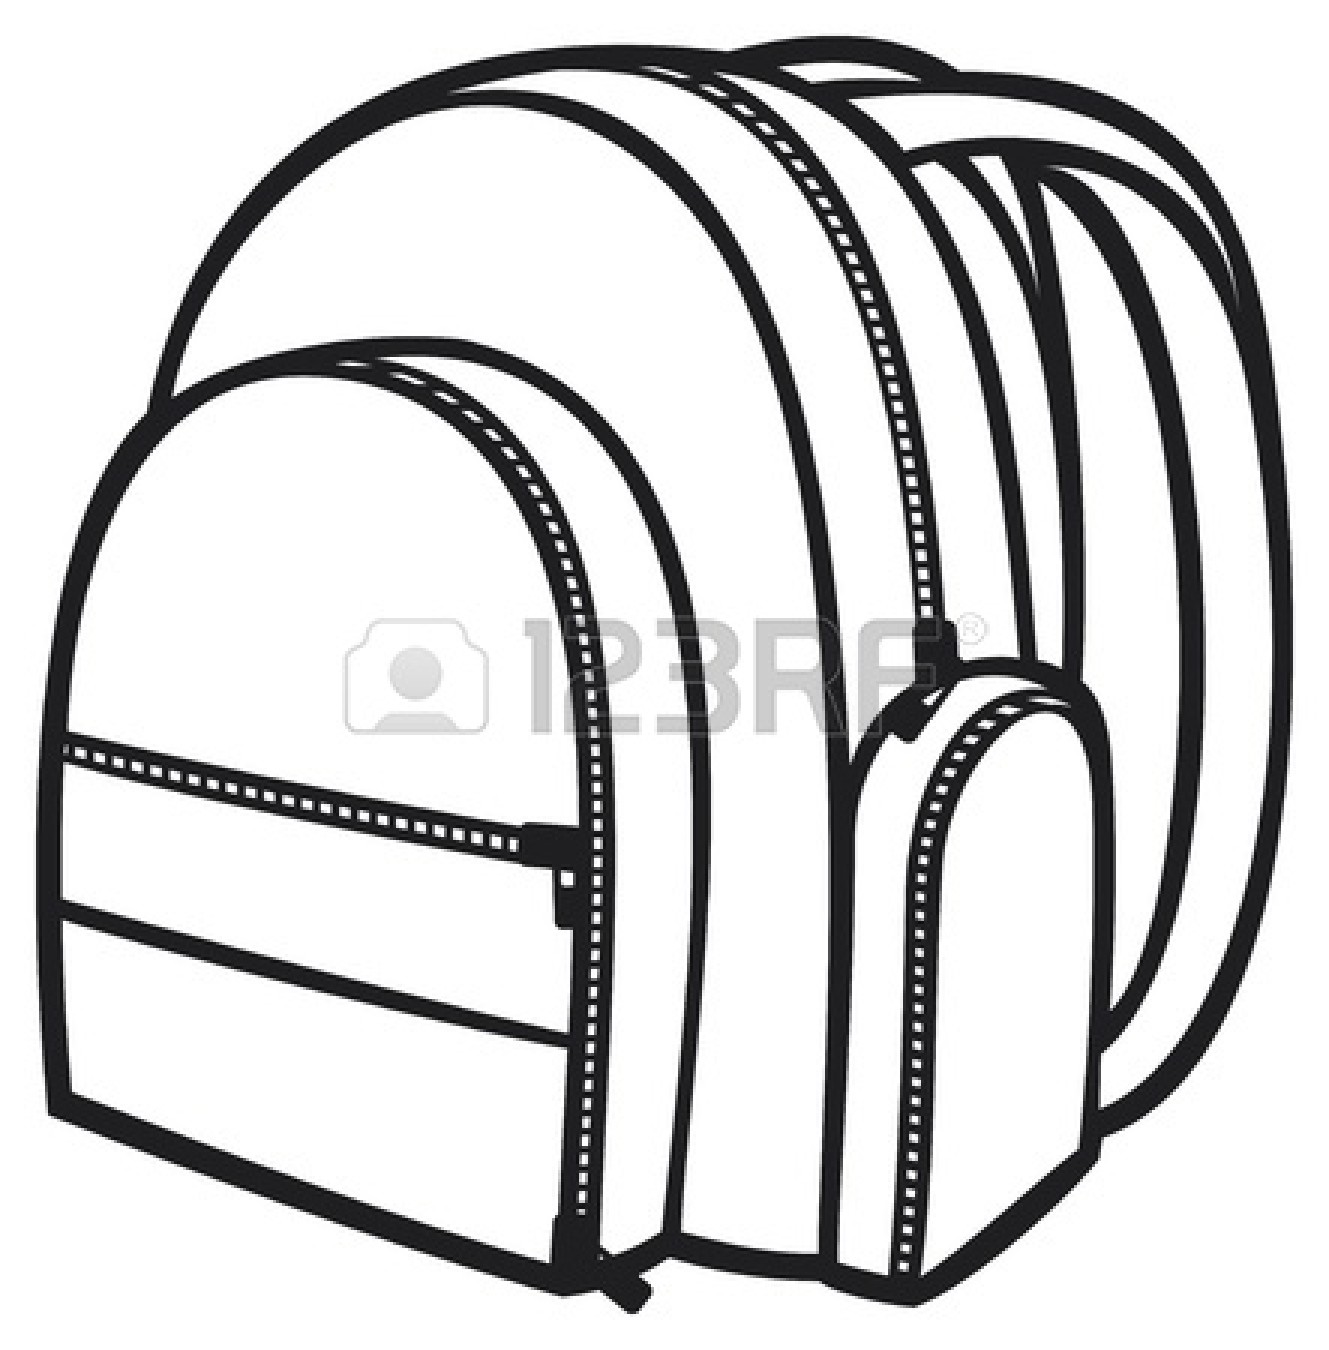 Black and white drawing of the bag clipart free image